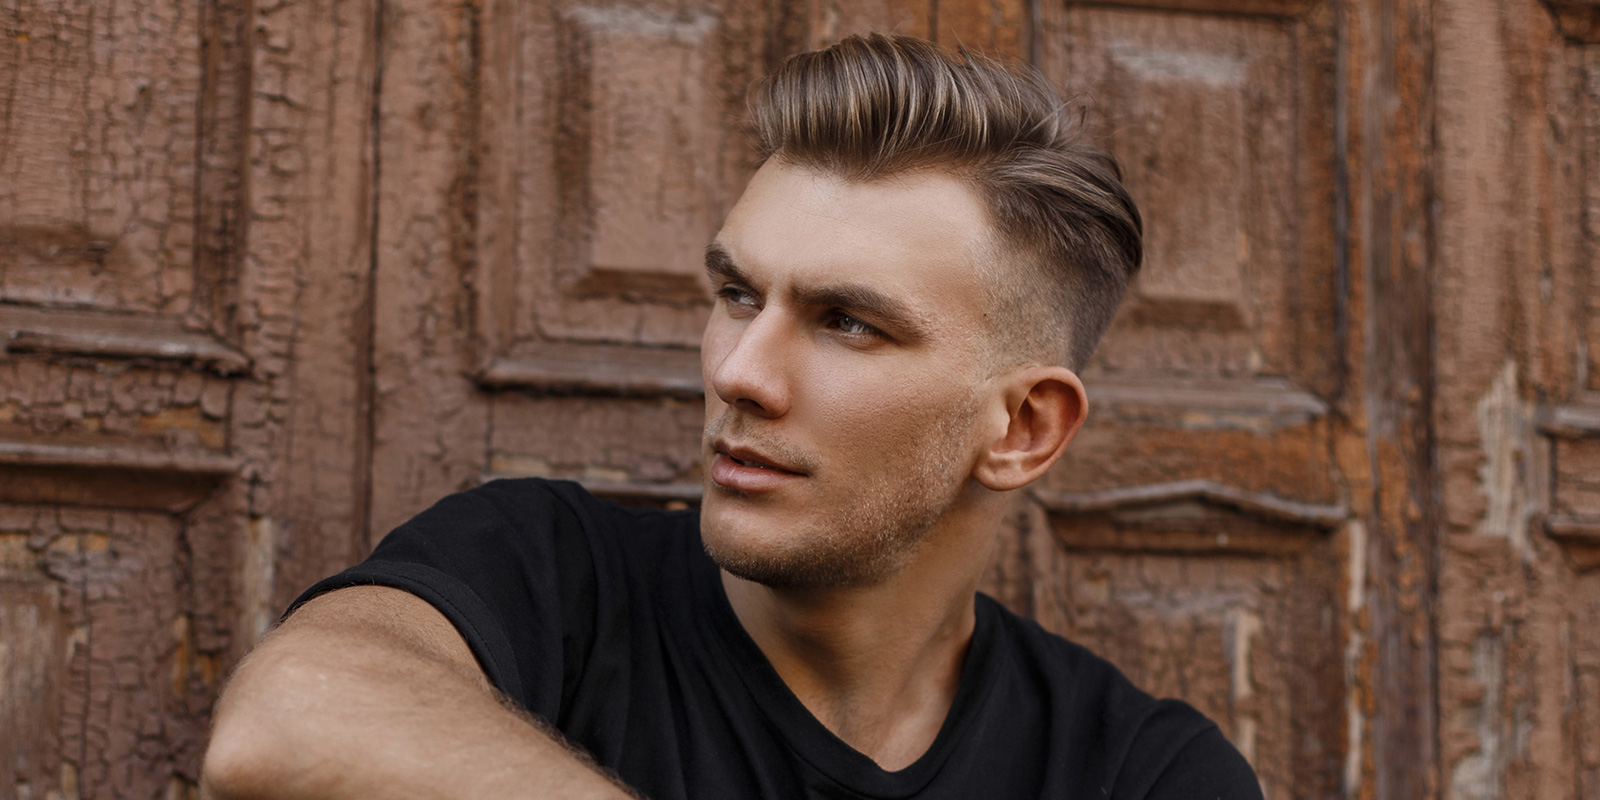 Undercut Hairstyle for Men At Home Using Clippers | Braun AU